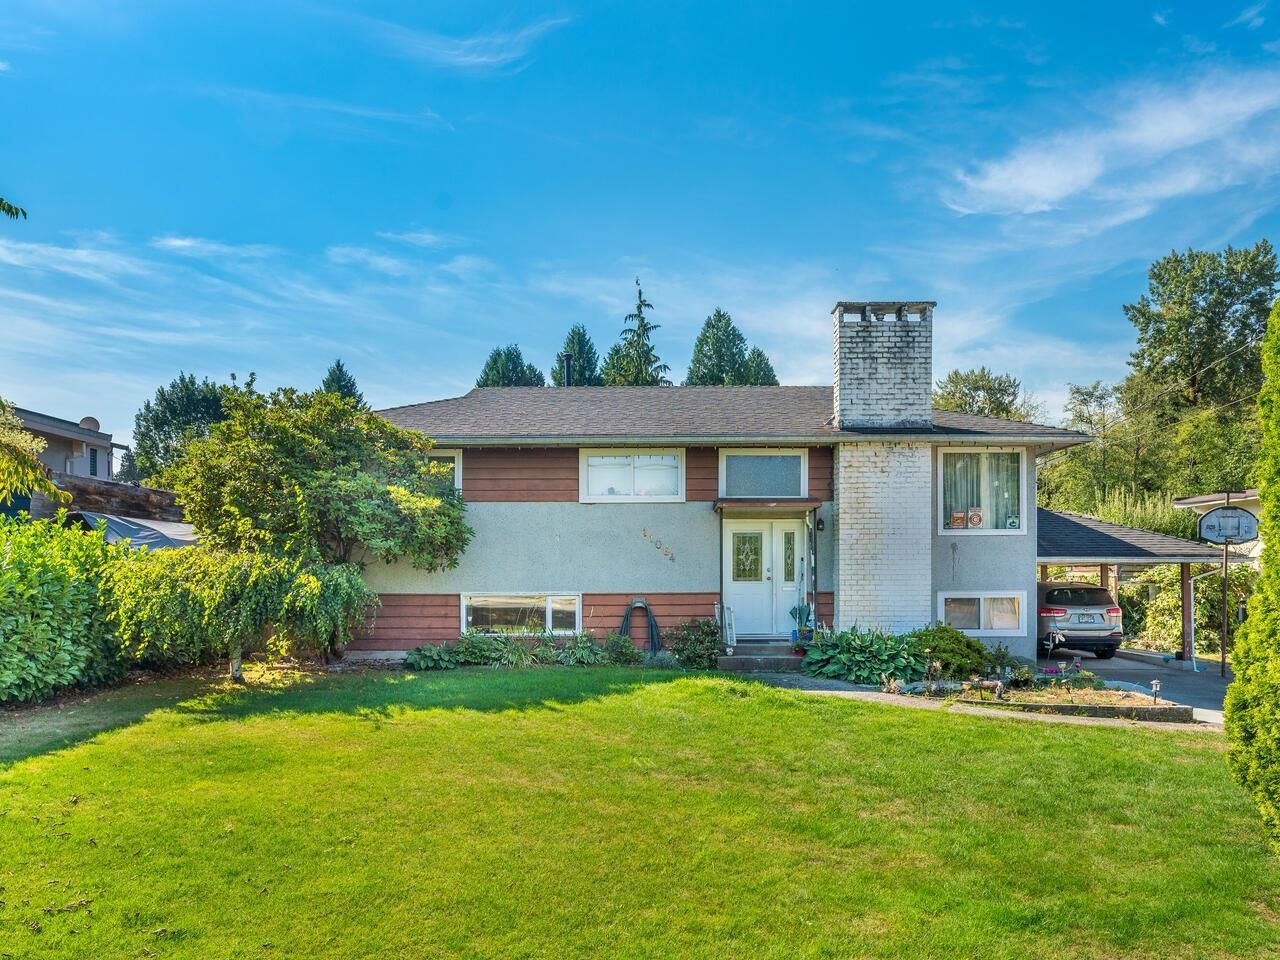 Main Photo: 11064 86A Avenue in Delta: Nordel House for sale (N. Delta)  : MLS®# R2610971